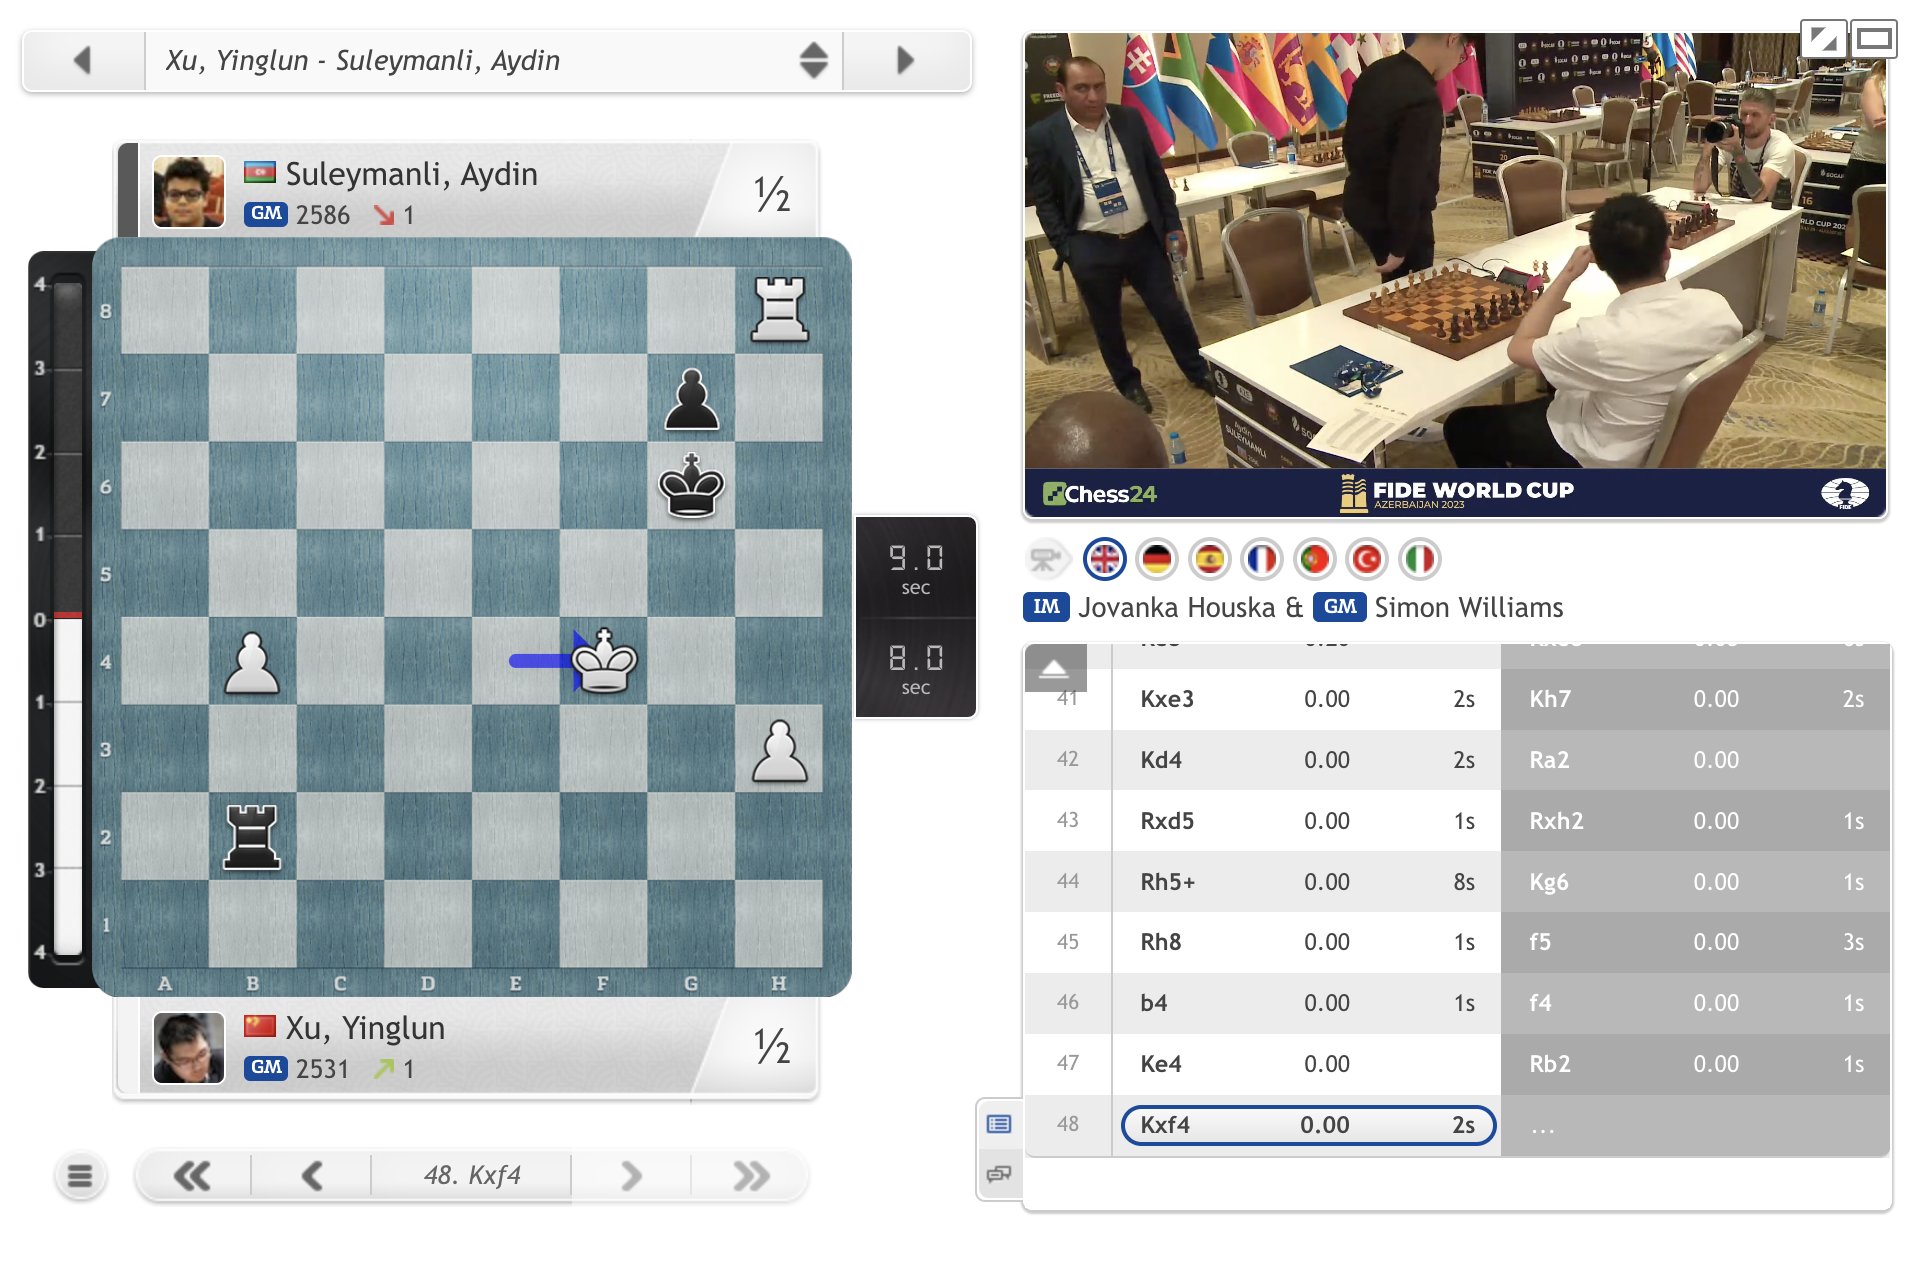 We are now live on  with game 2 of the FIDE World Cup